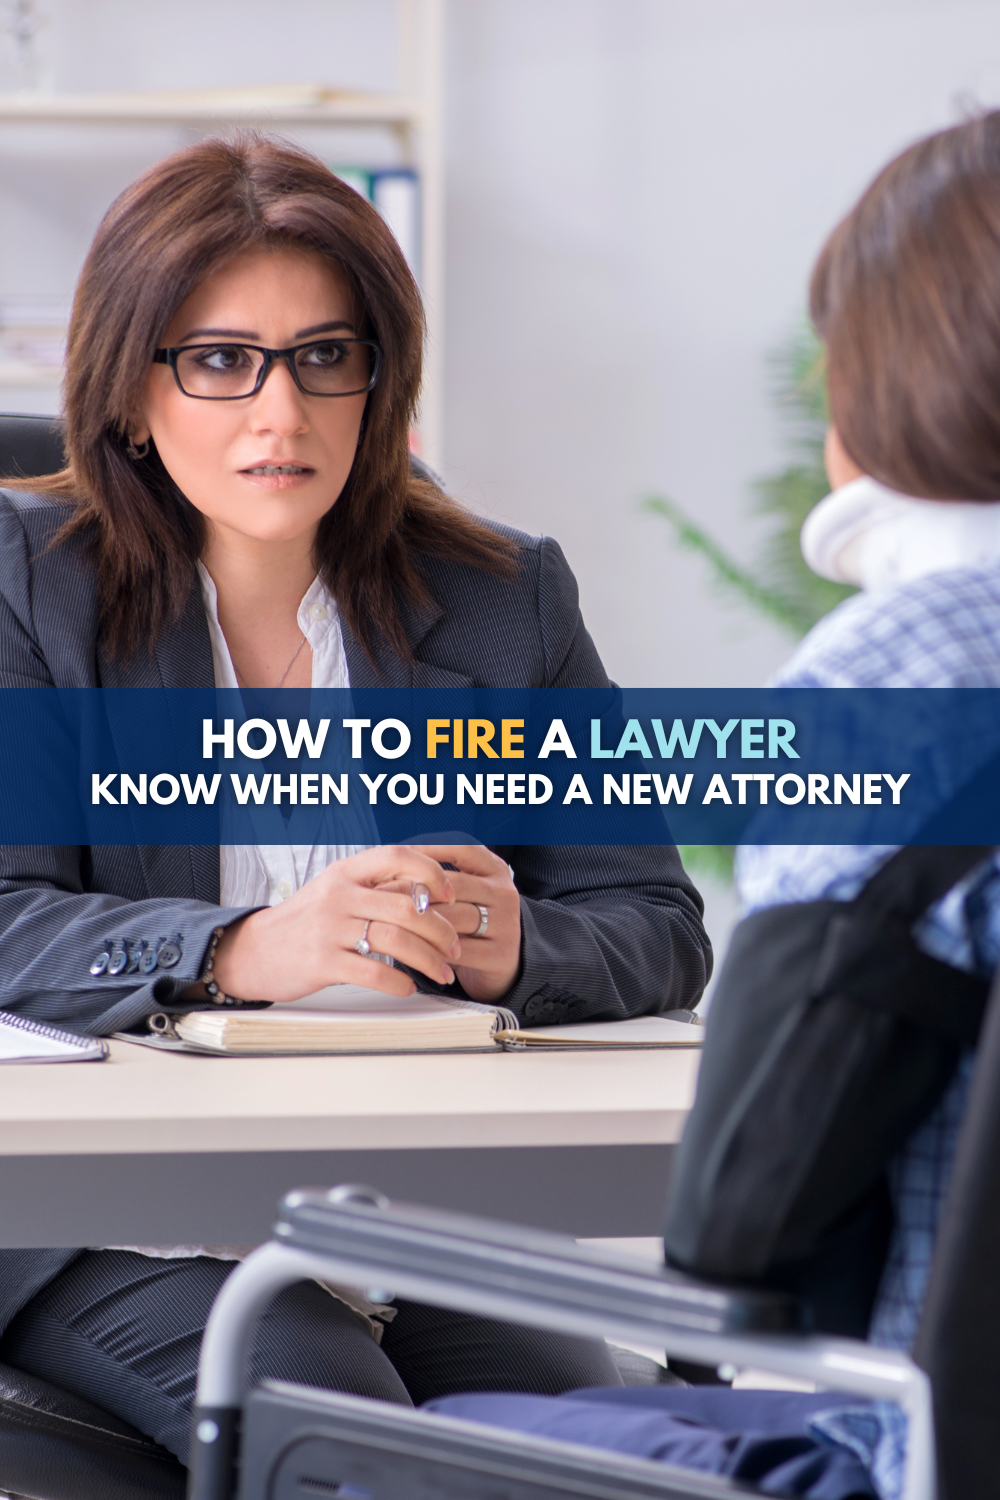 How To Fire A Lawyer - When To Know When You Need A New Attorney